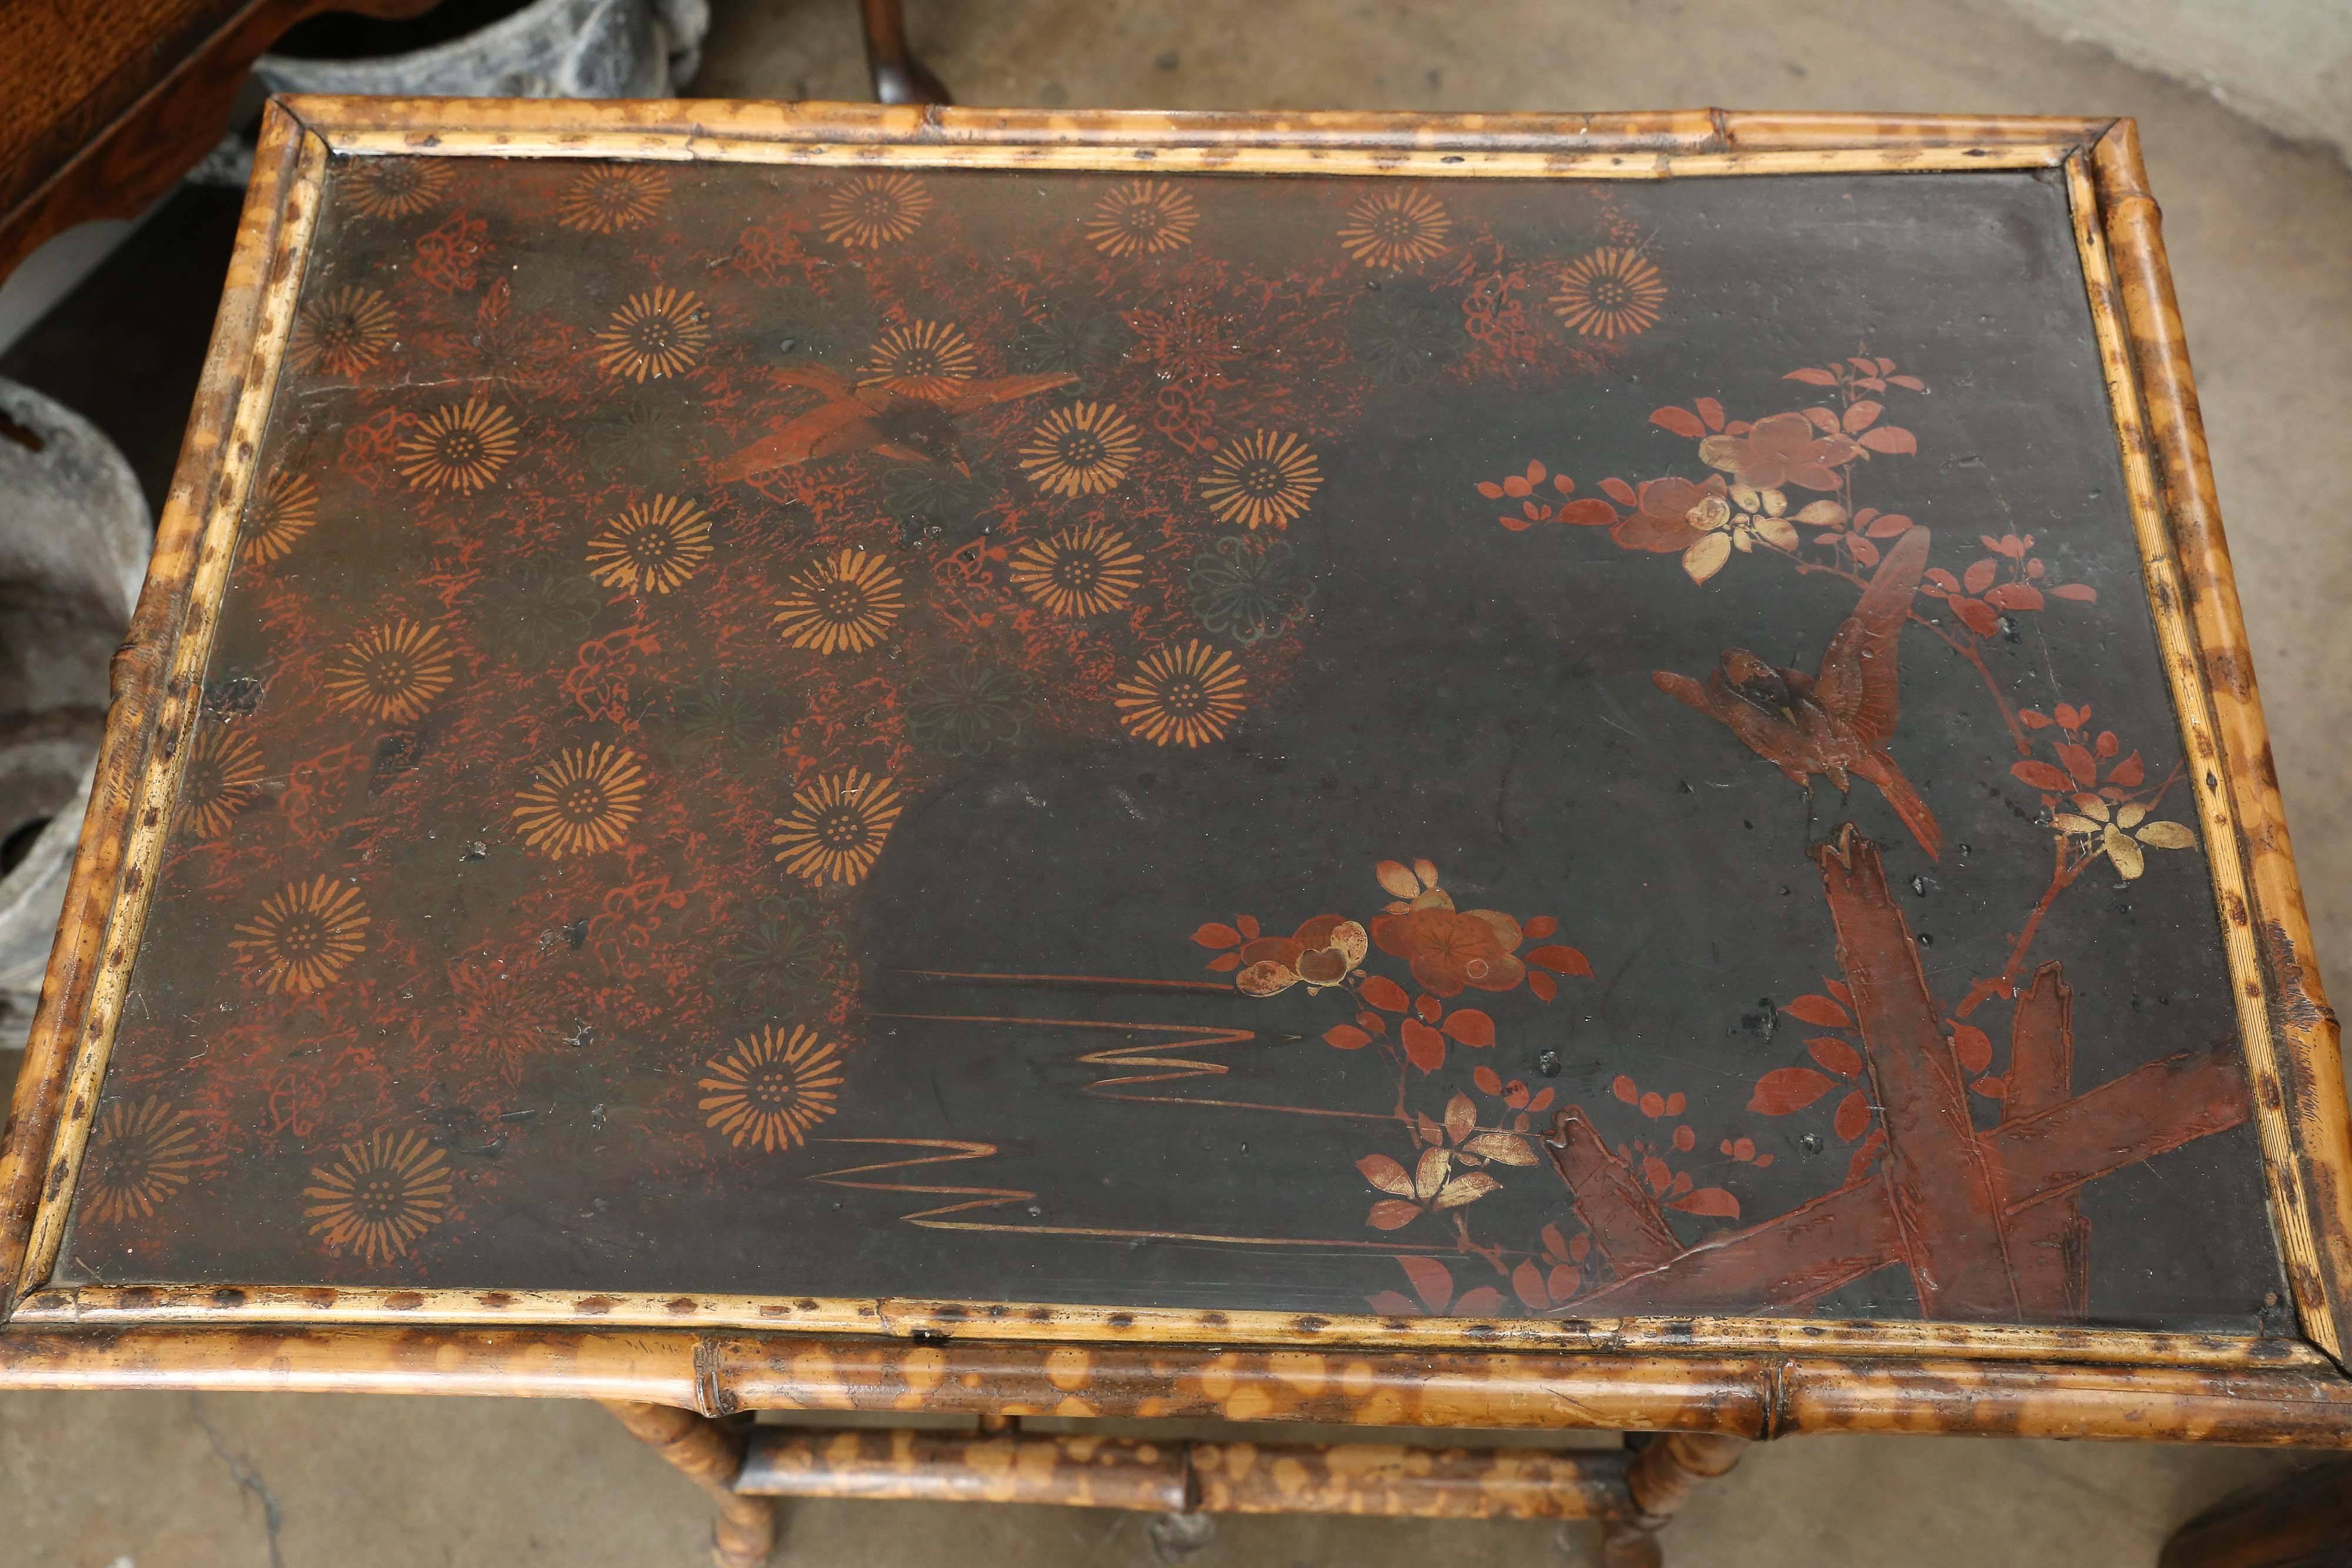 19th century scorched bamboo side table with chinoiserie detail on top. Beautiful structured stretchers.